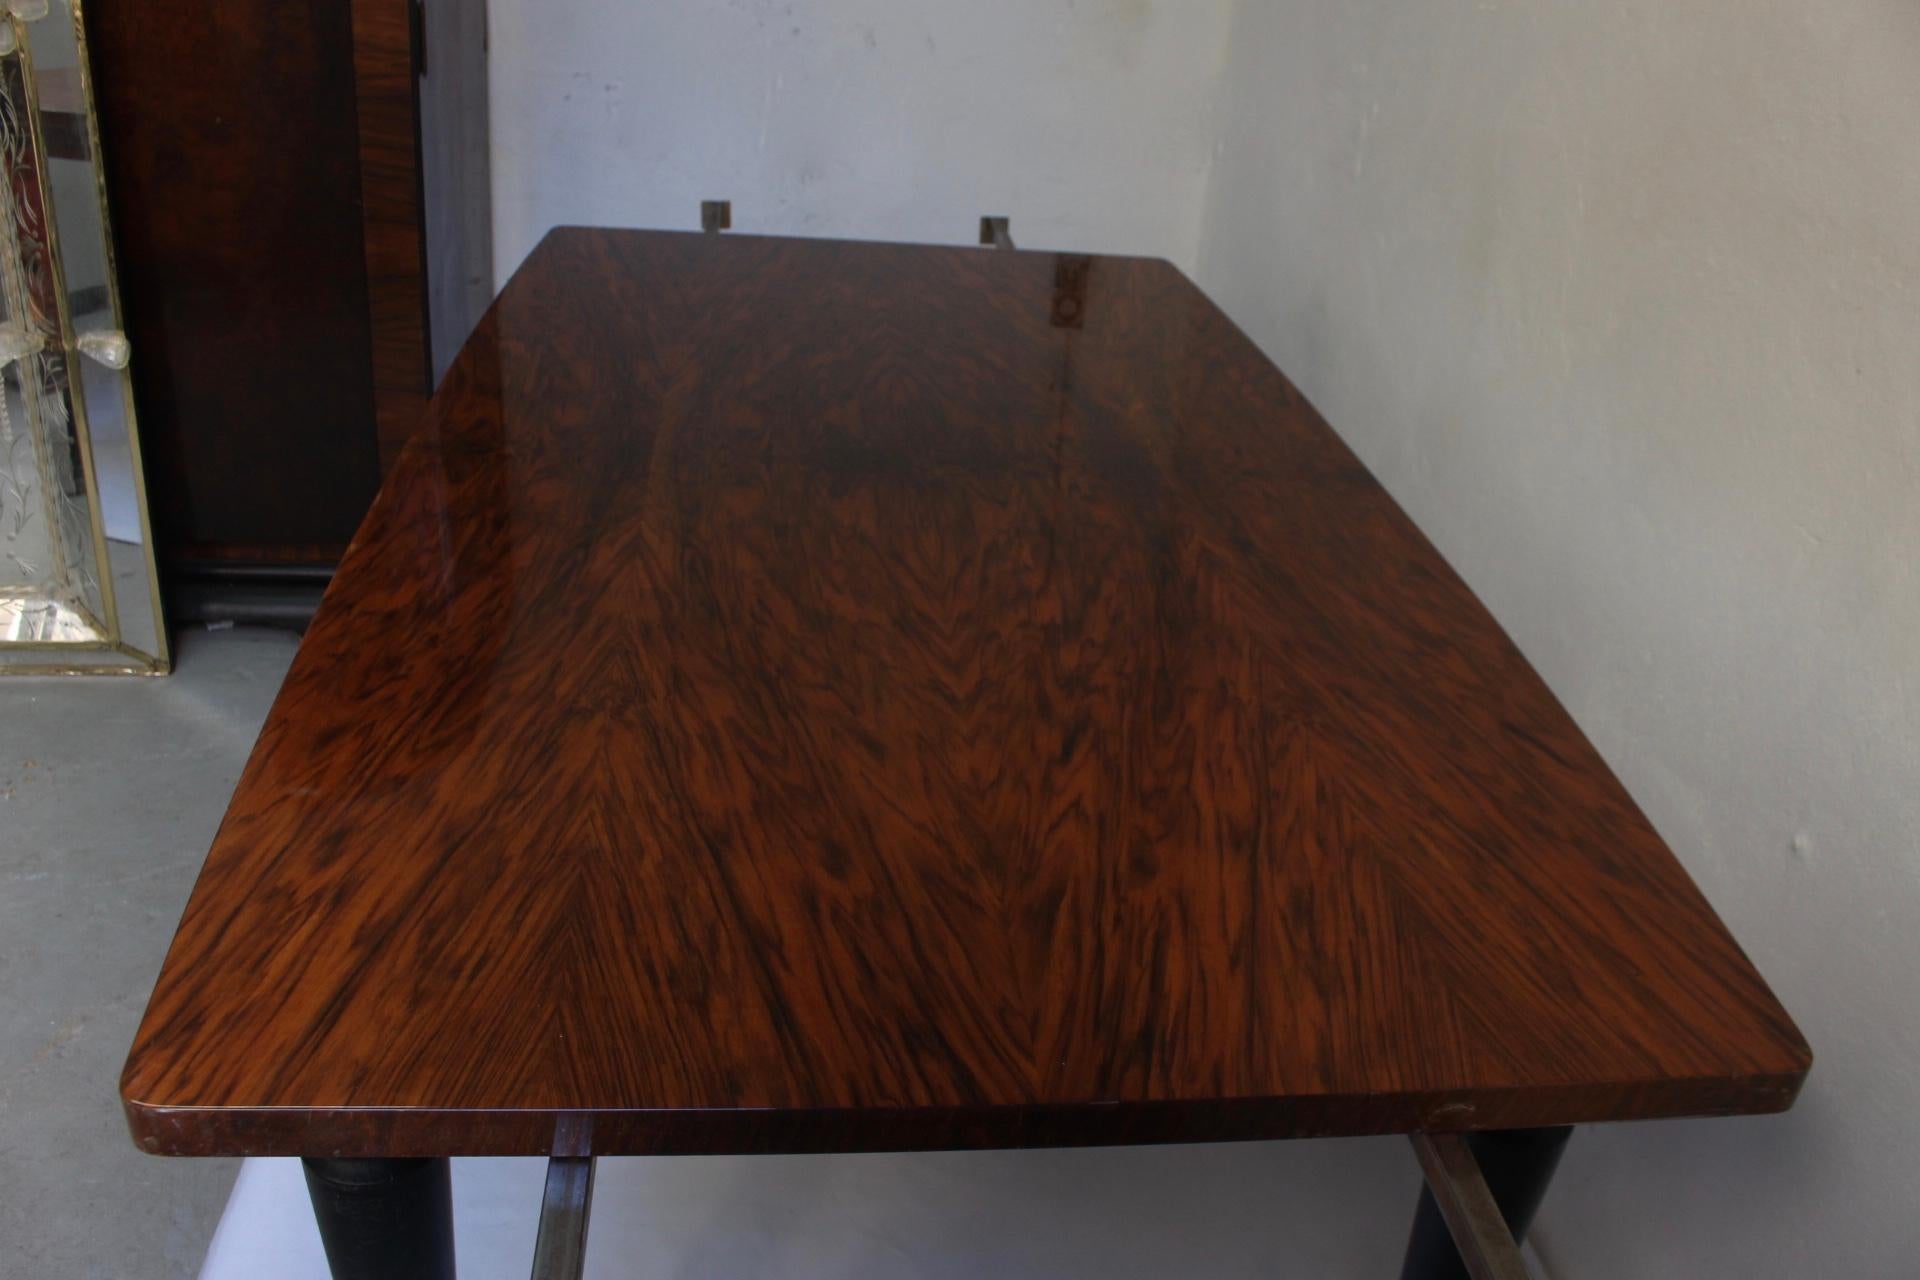 French Art Deco High Quality American Walnut Burl Extensible Dining Table, 1940s For Sale 6